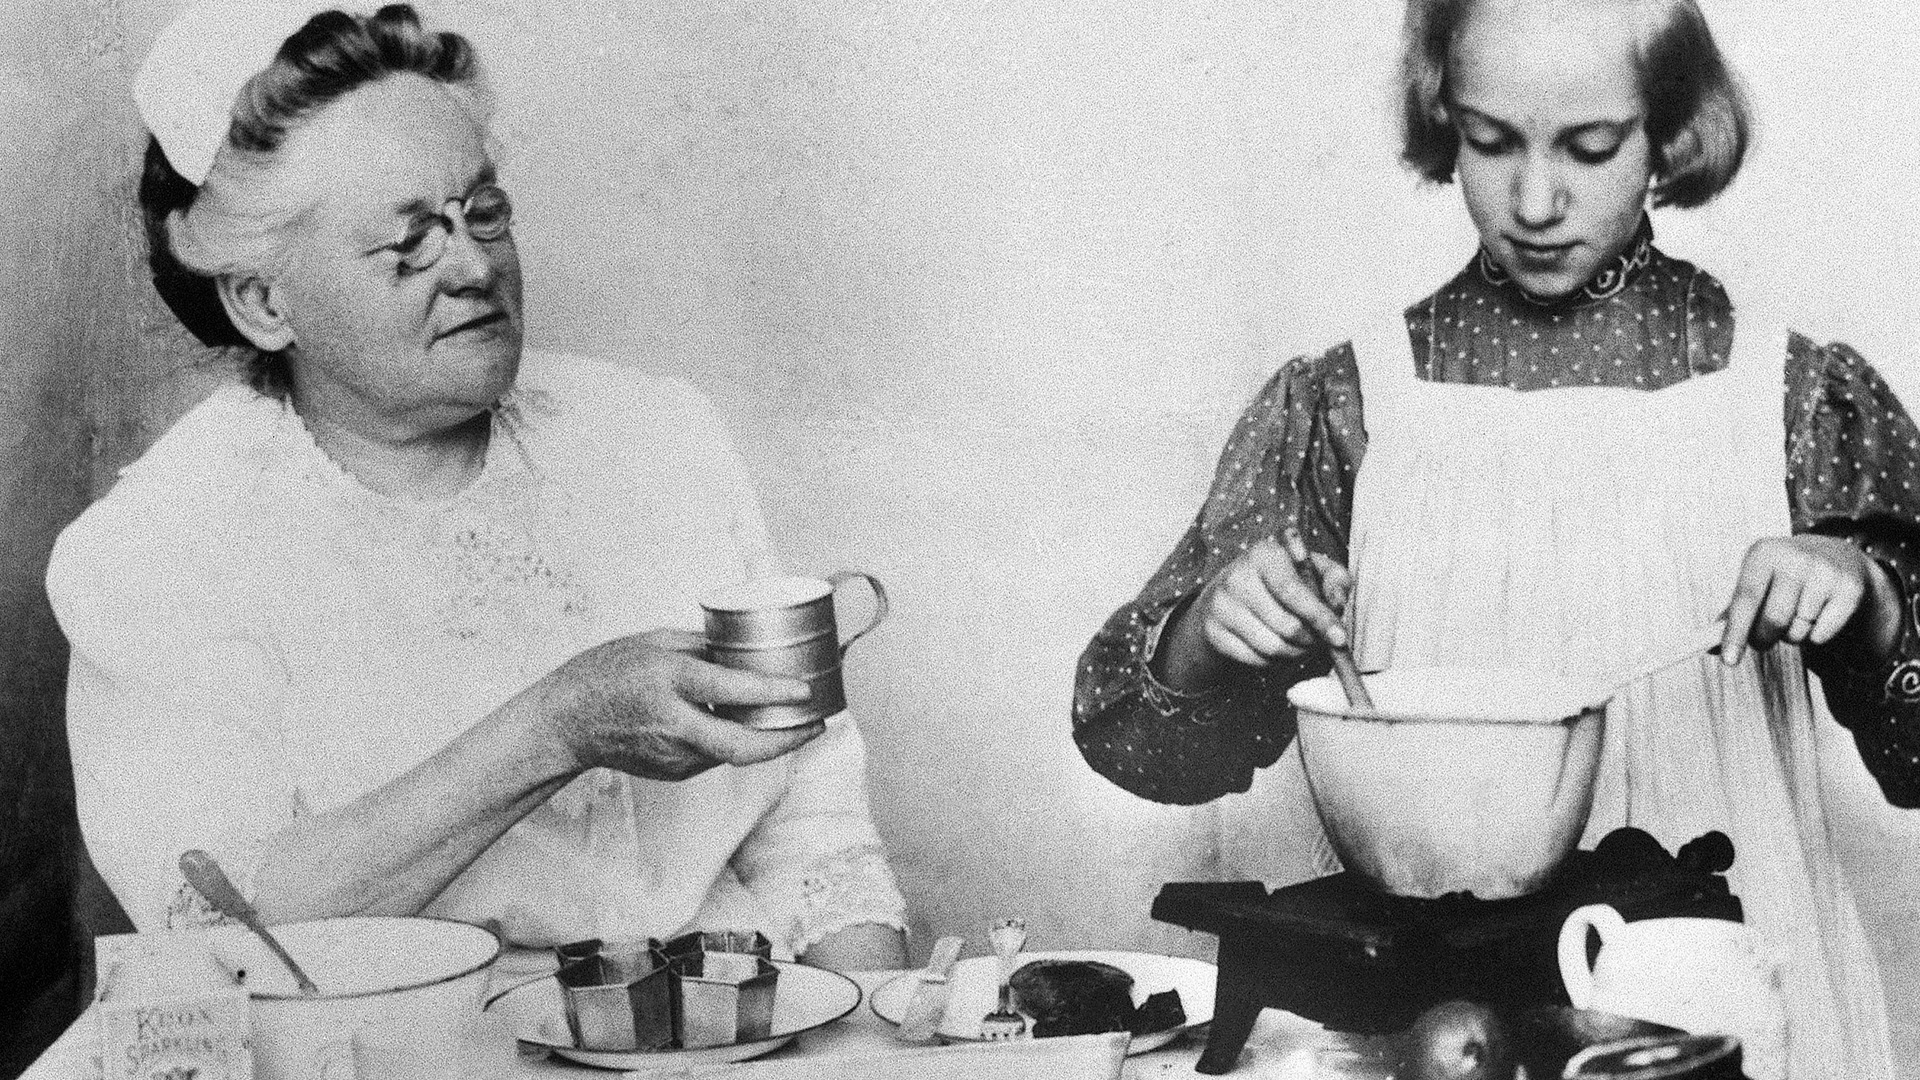 January 7, 1896: Fannie Farmer’s First Cookbook Was Published, Revolutionizing Home Cooking